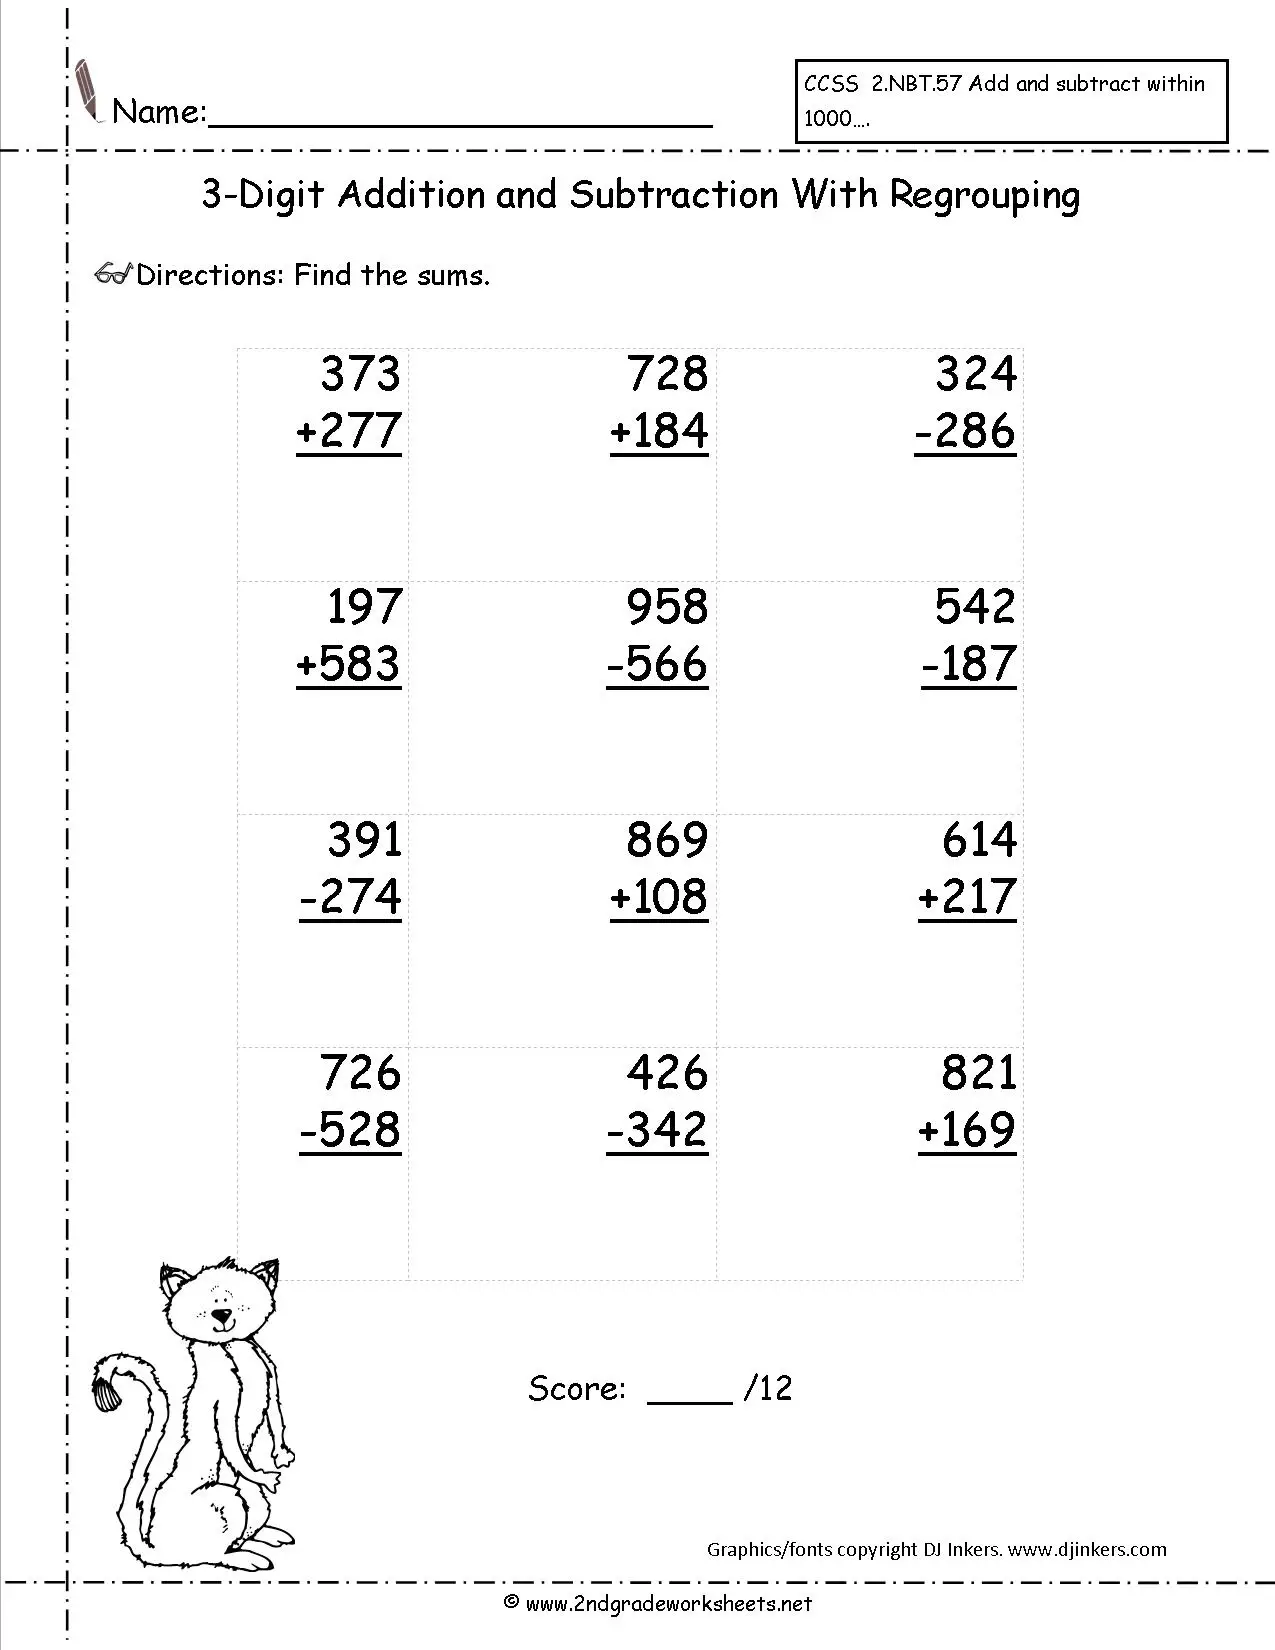 70 Addition and Subtraction Worksheets | KittyBabyLove.com